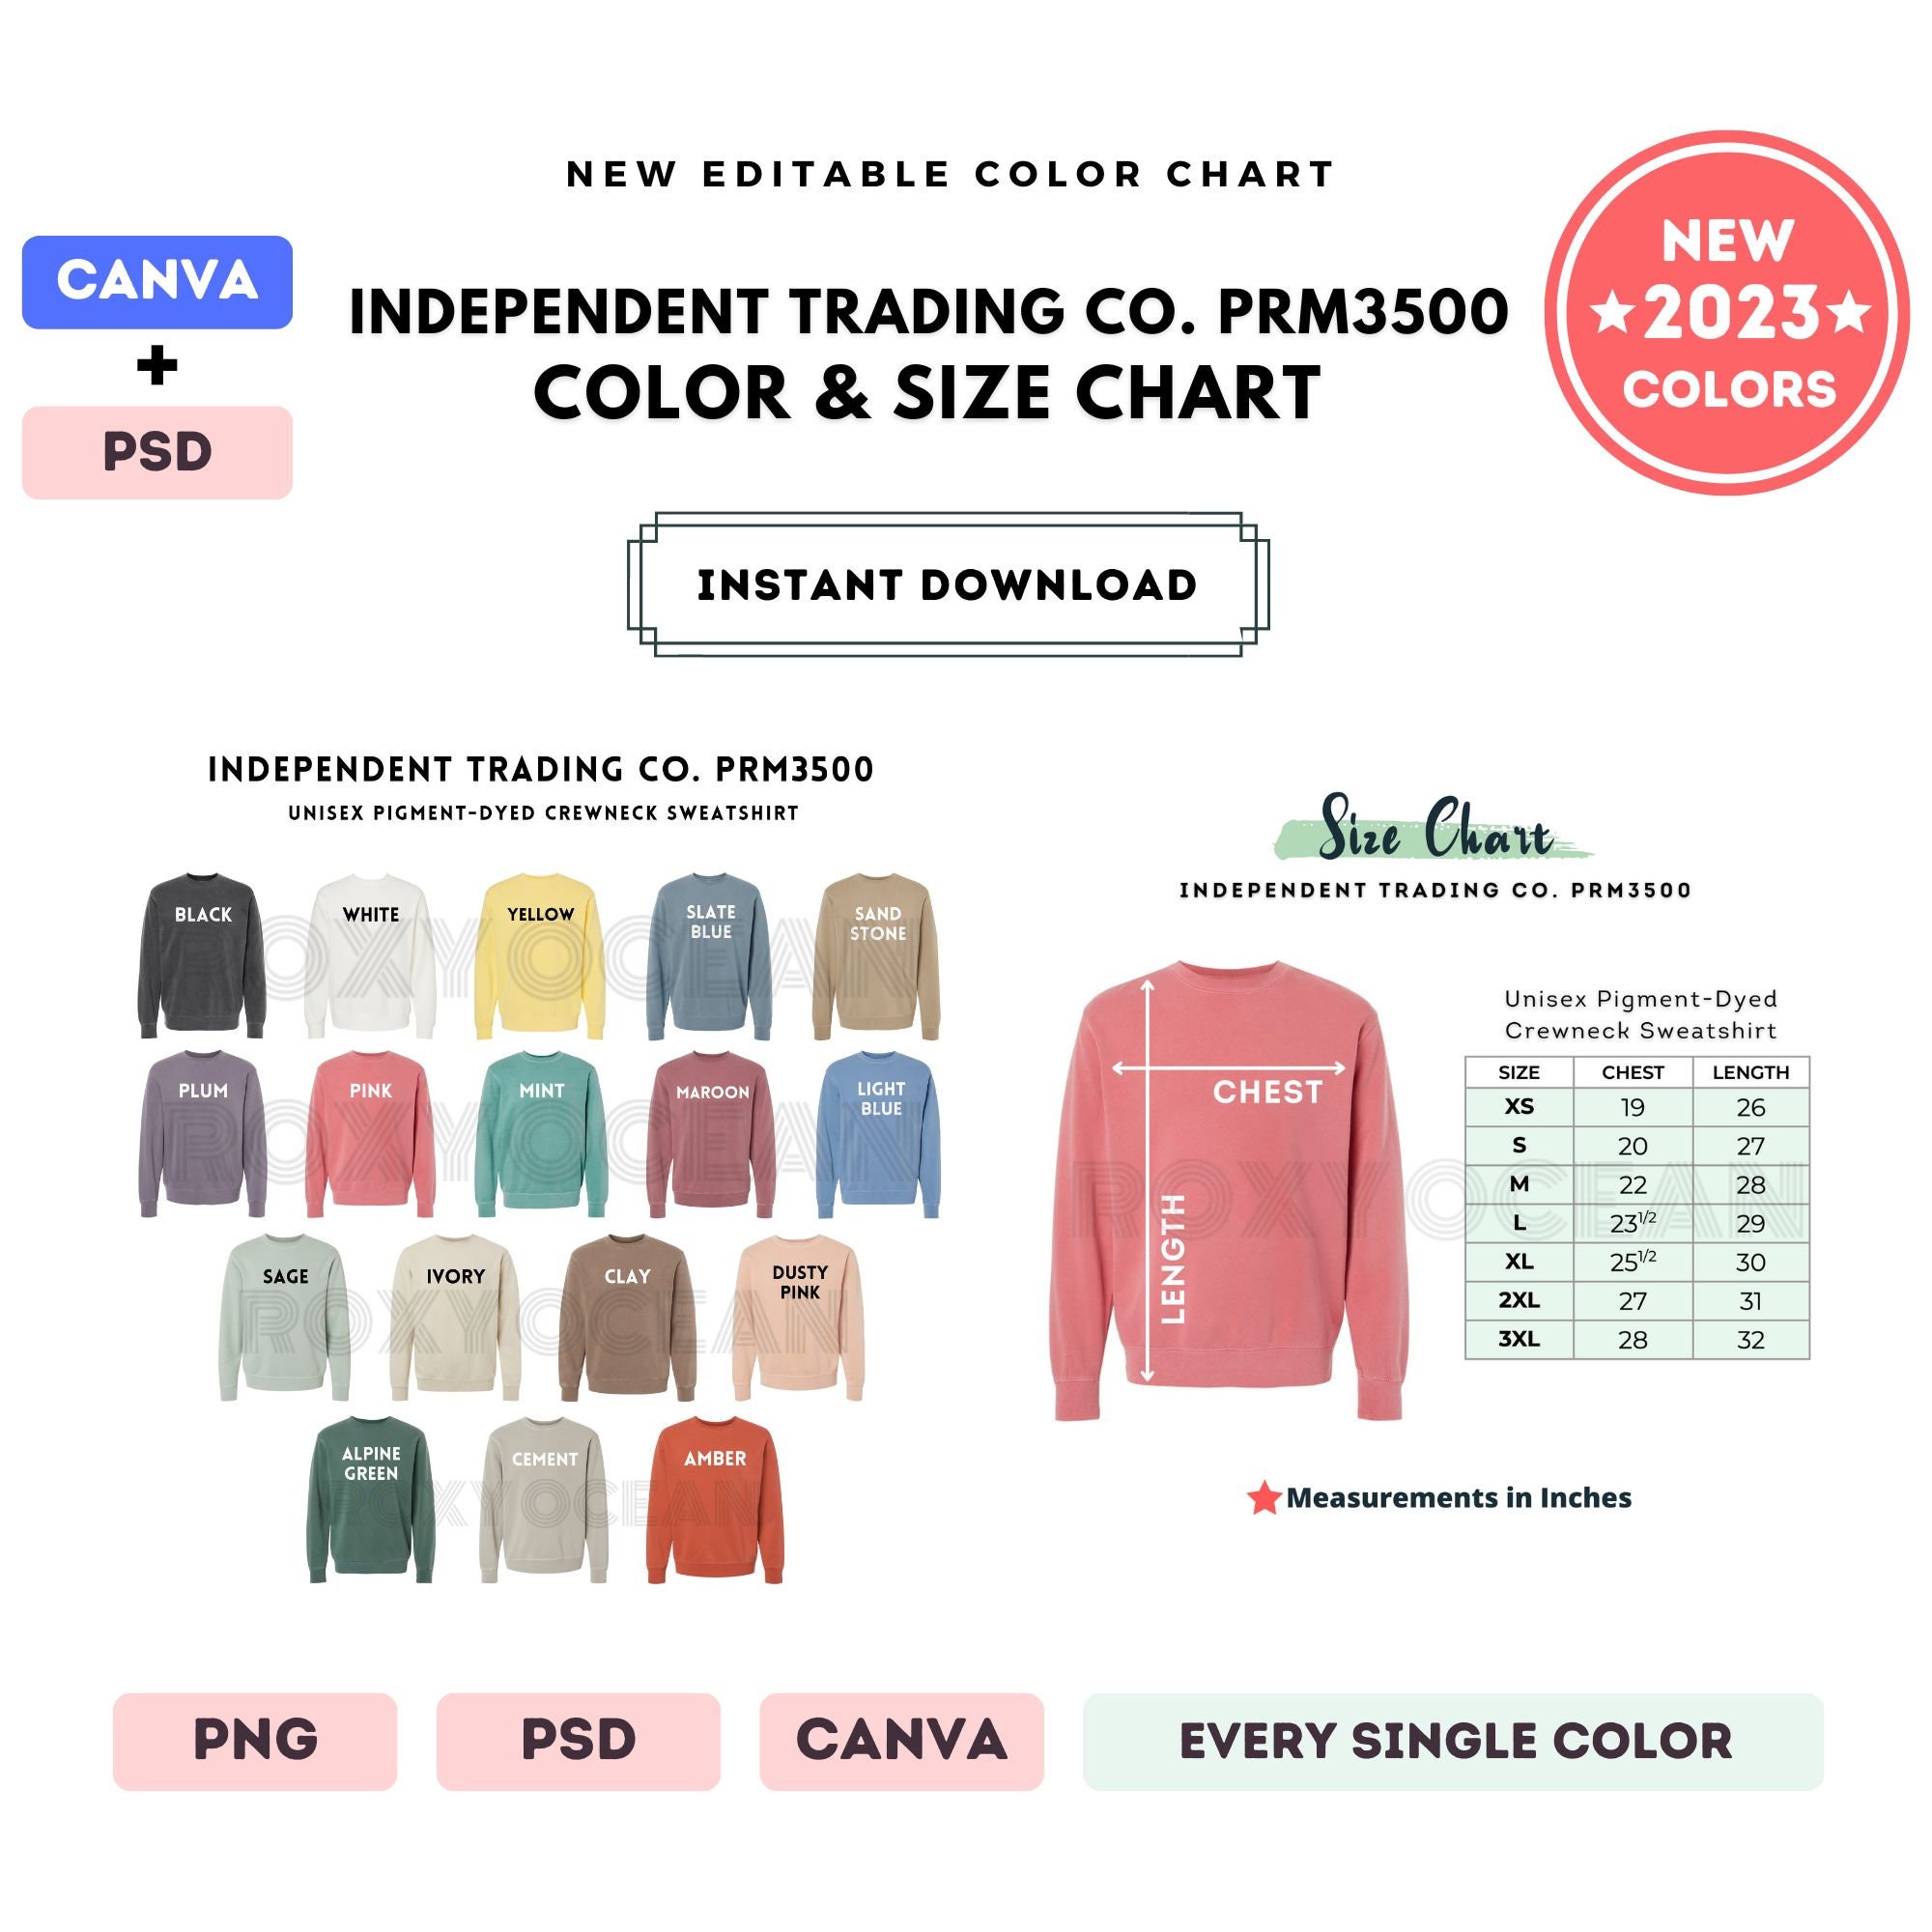 Independent Trading Co.prm3500 Color Size Chart EDITABLE - Etsy